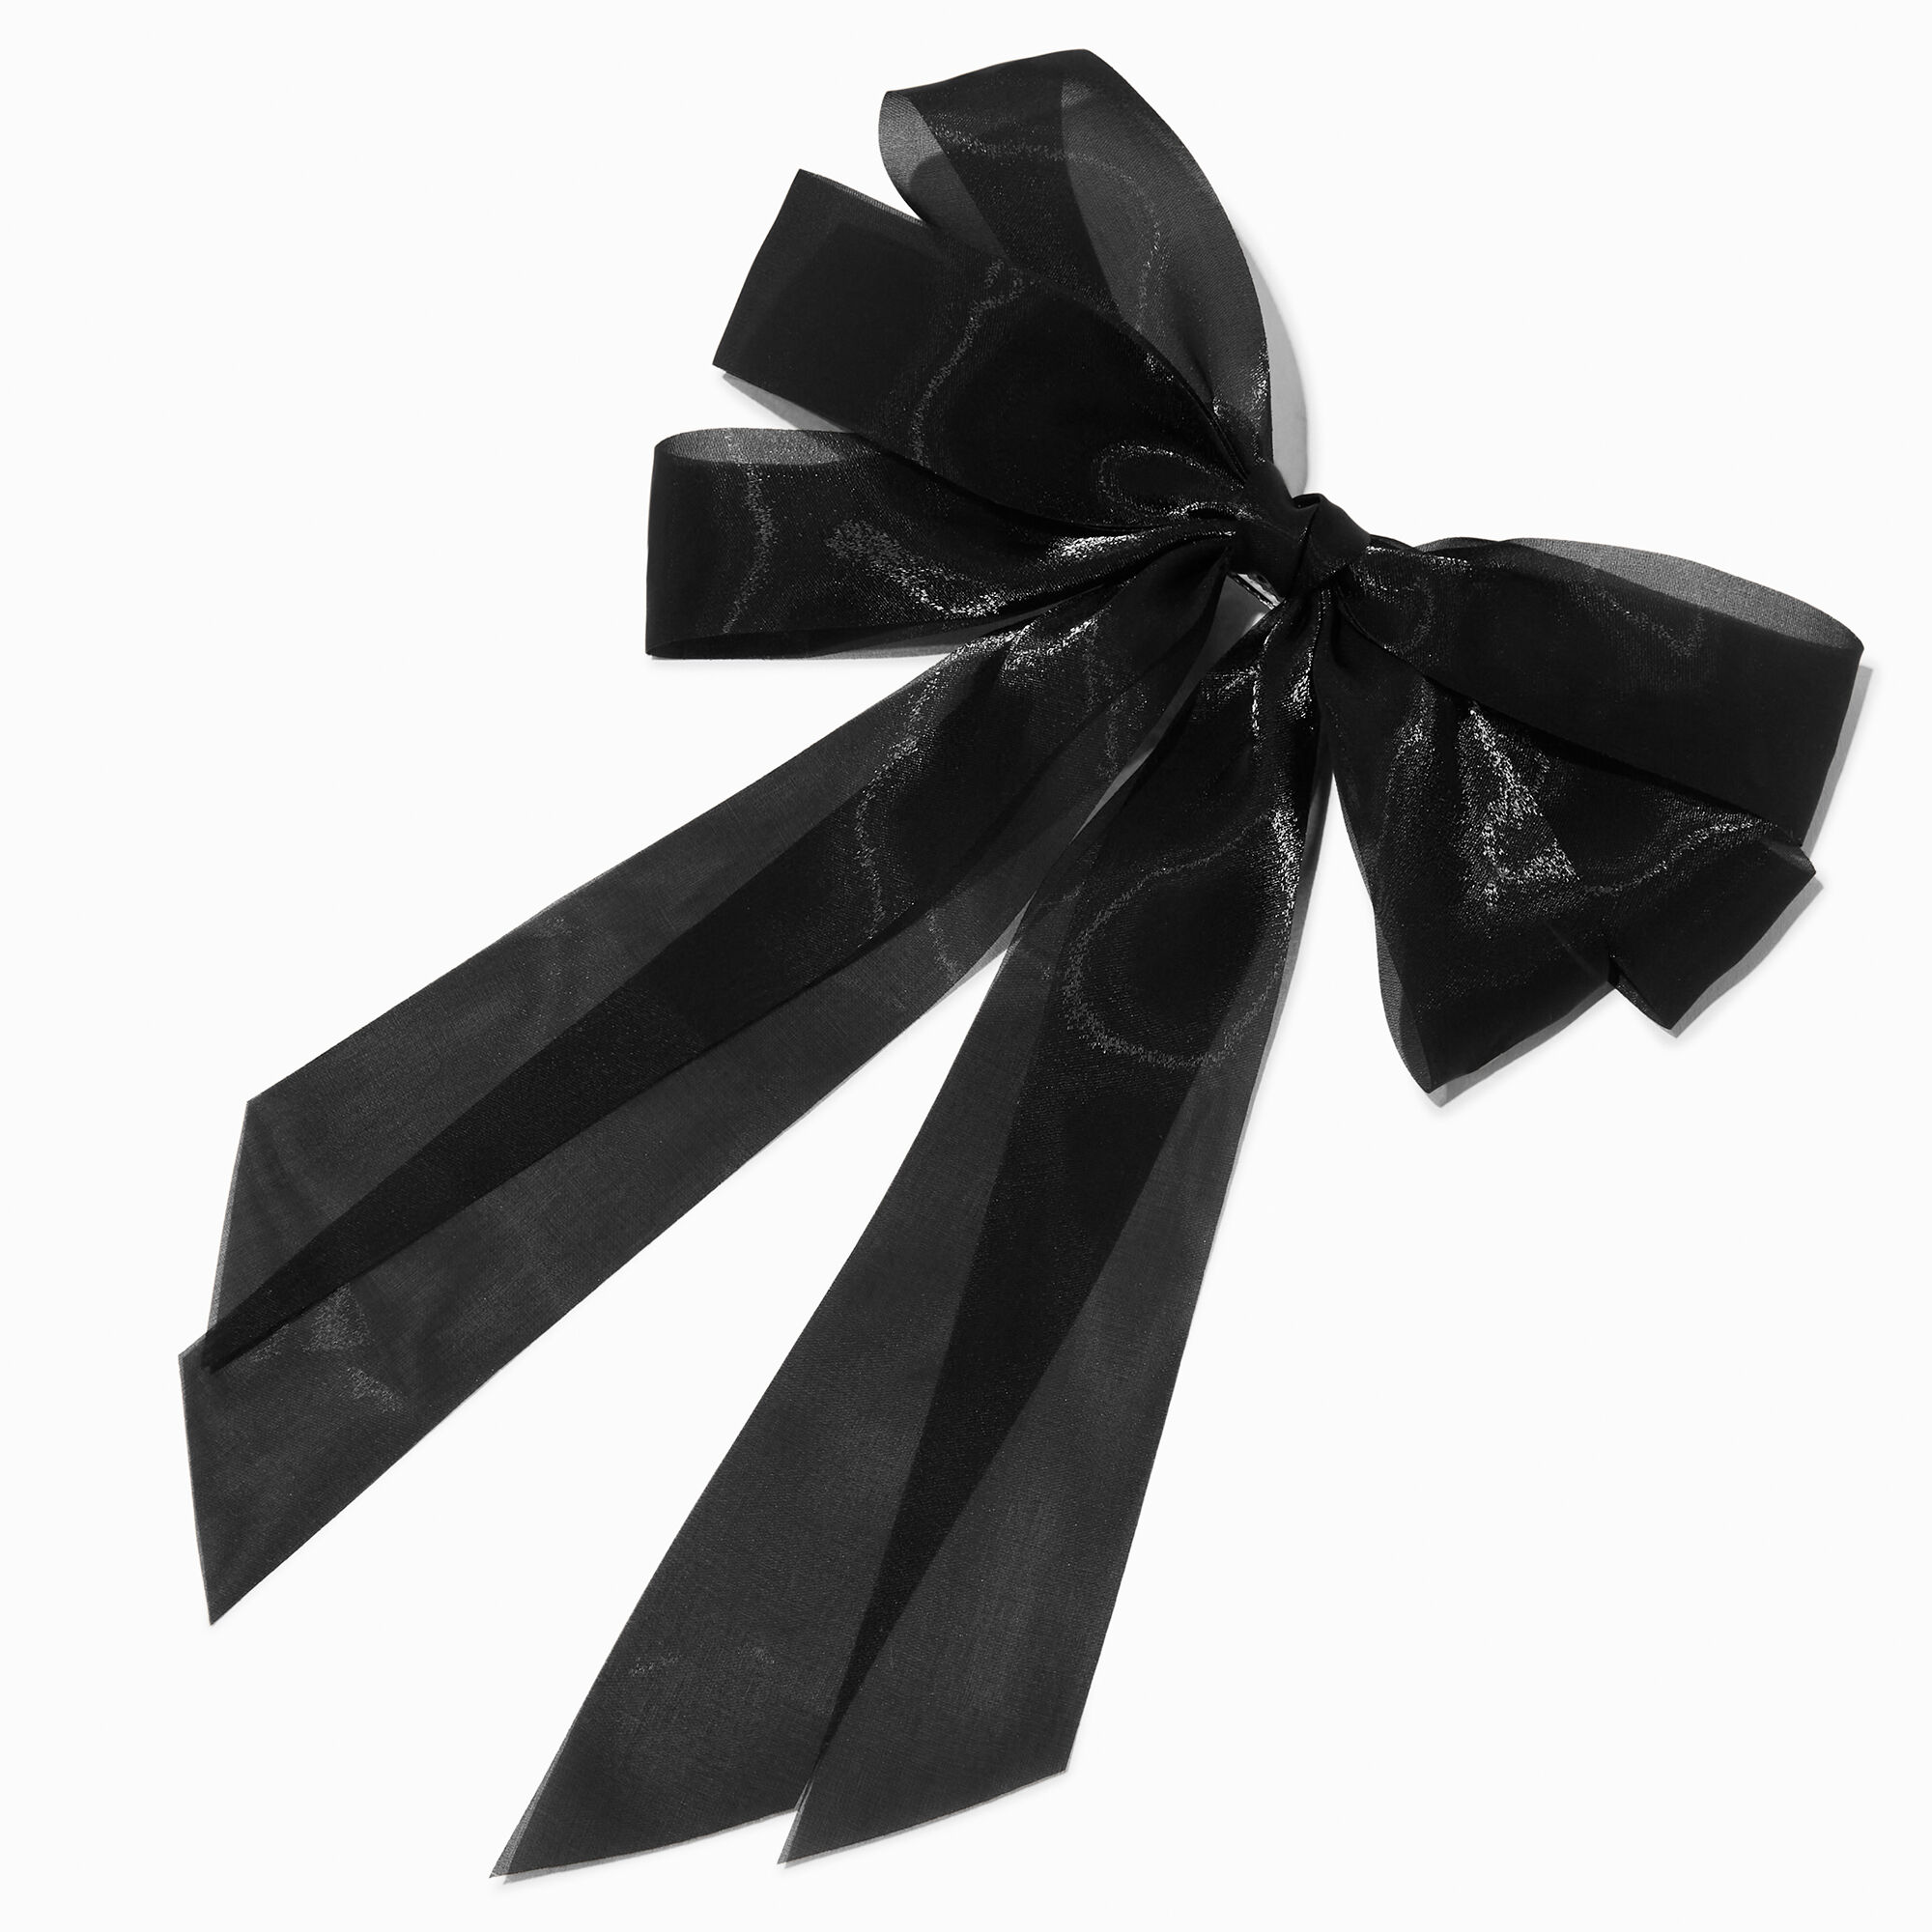 View Claires Pearlized Triple Hair Bow Clip Black information